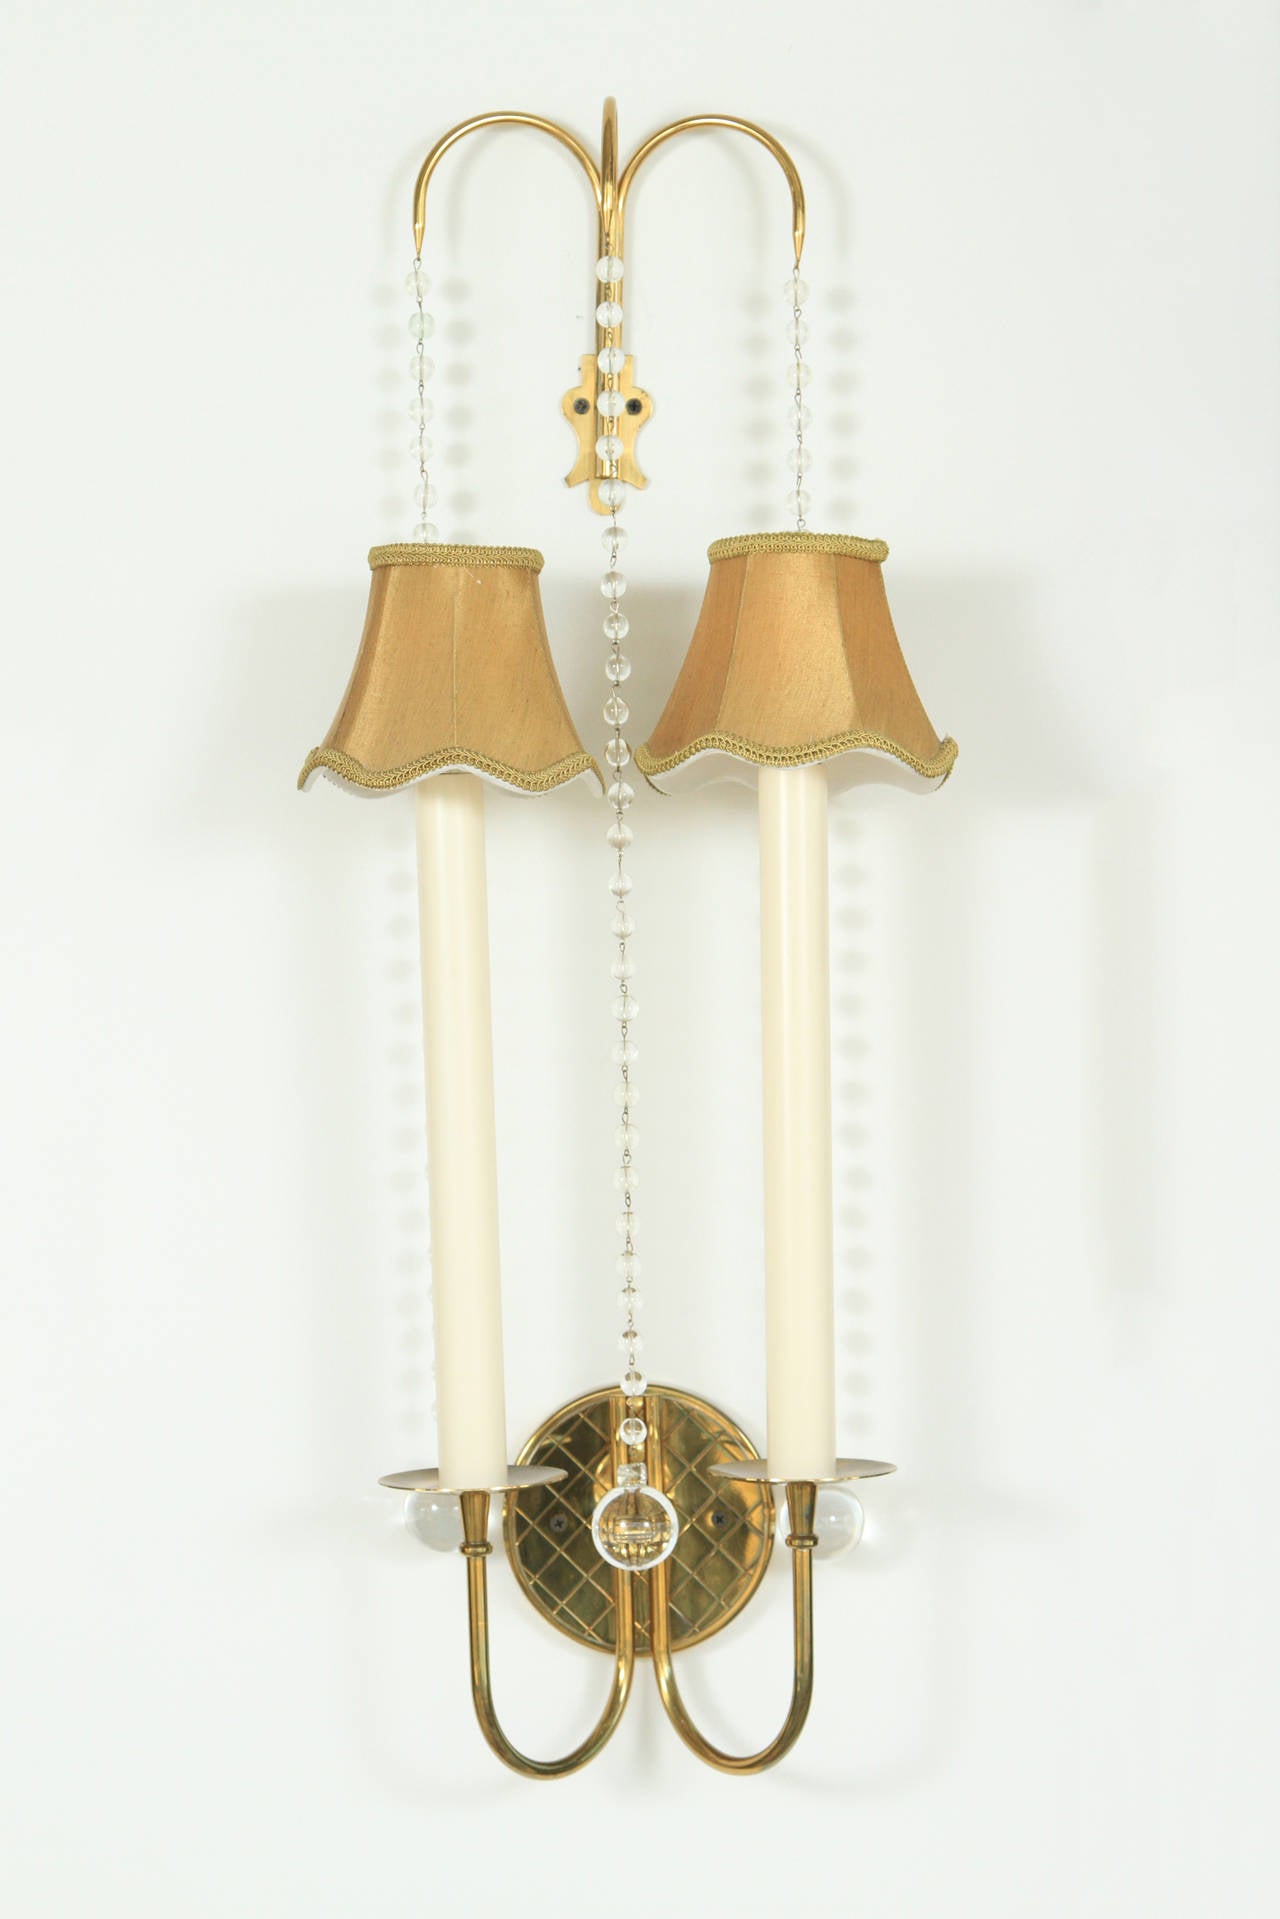 Sophisticated and dramatic sconces with 